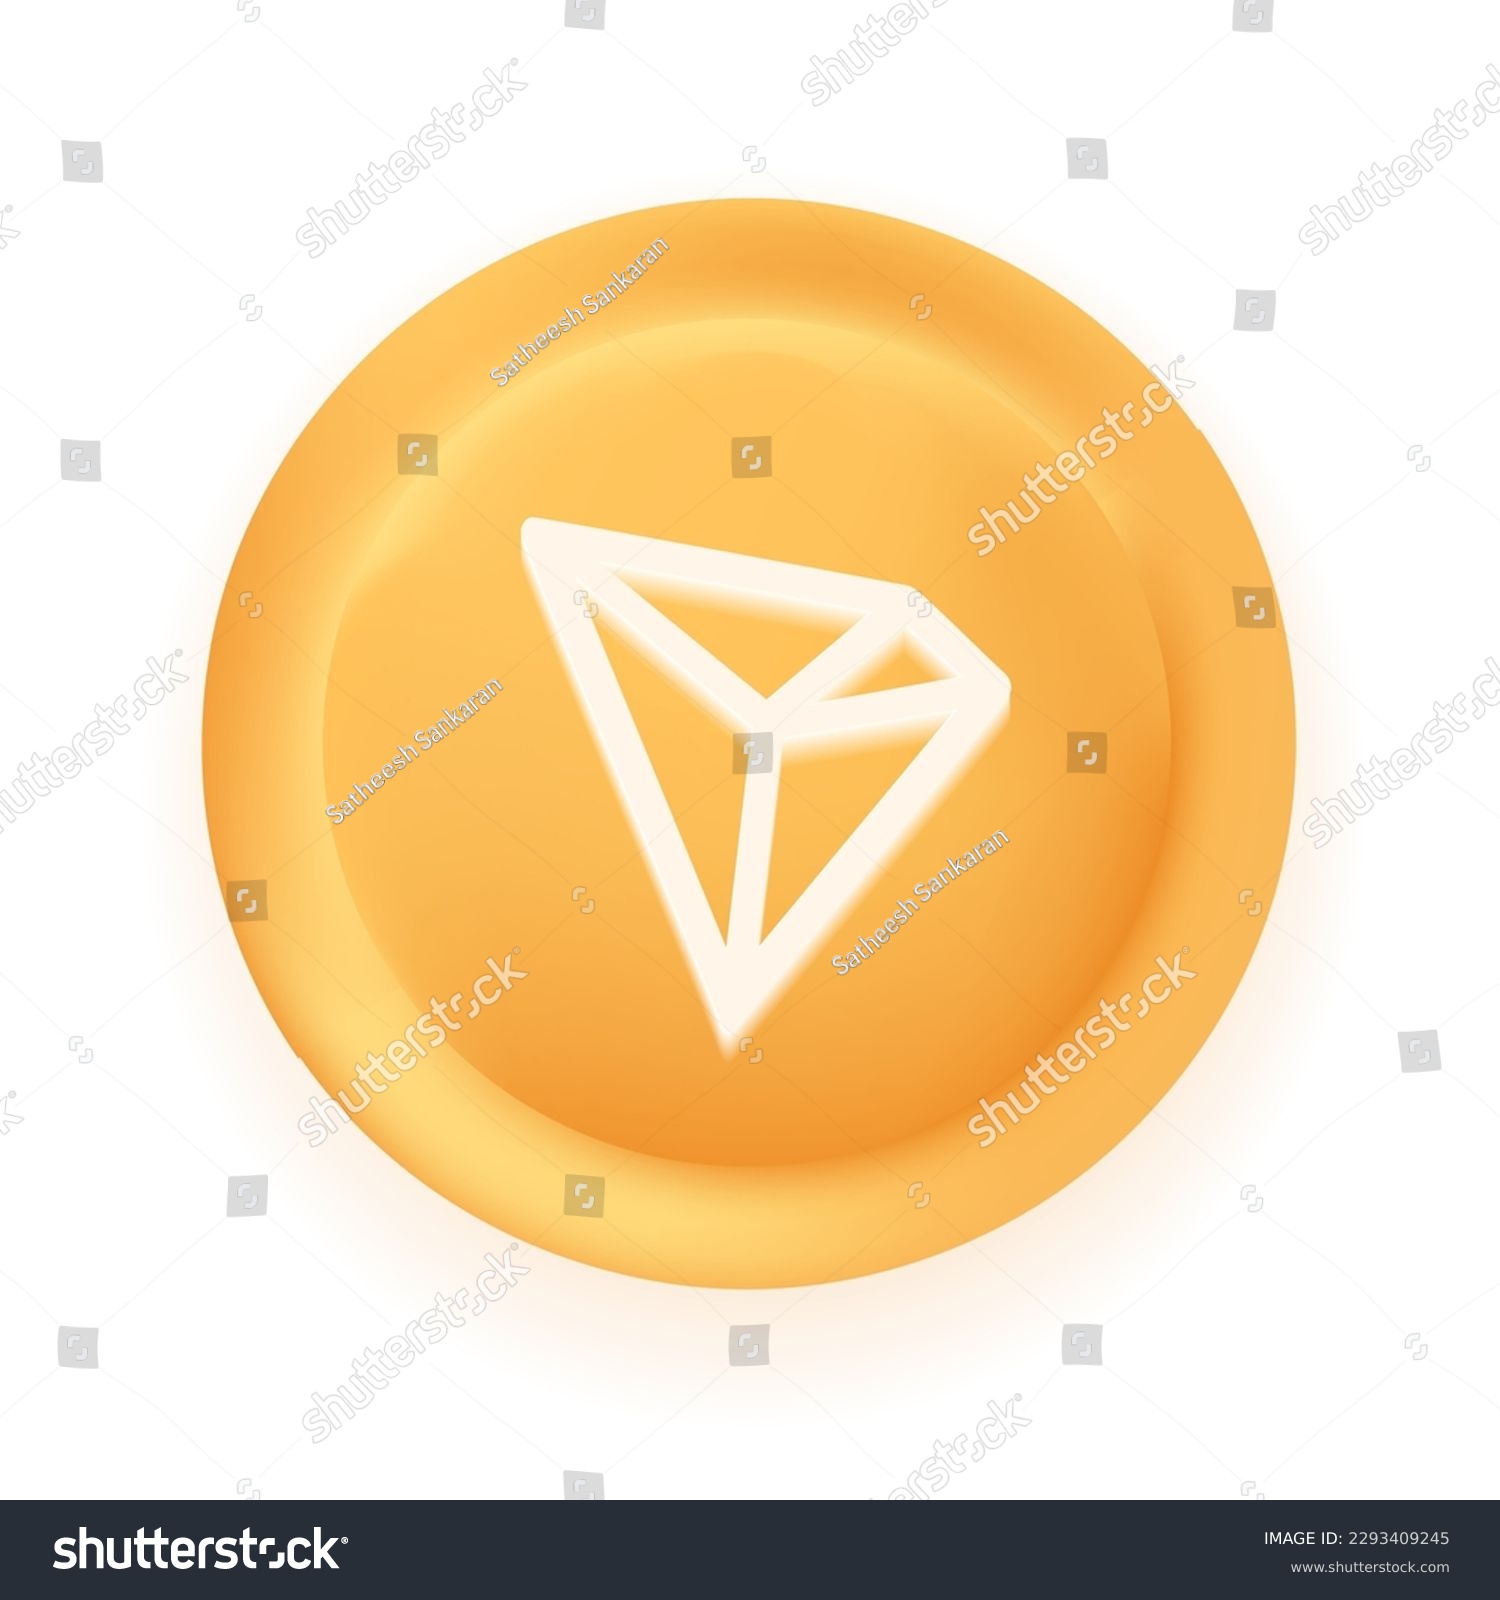 SVG of Tron (TRX) crypto currency 3D coin vector illustration isolated on white background. Can be used as virtual money icon, logo, emblem, sticker and badge designs. svg